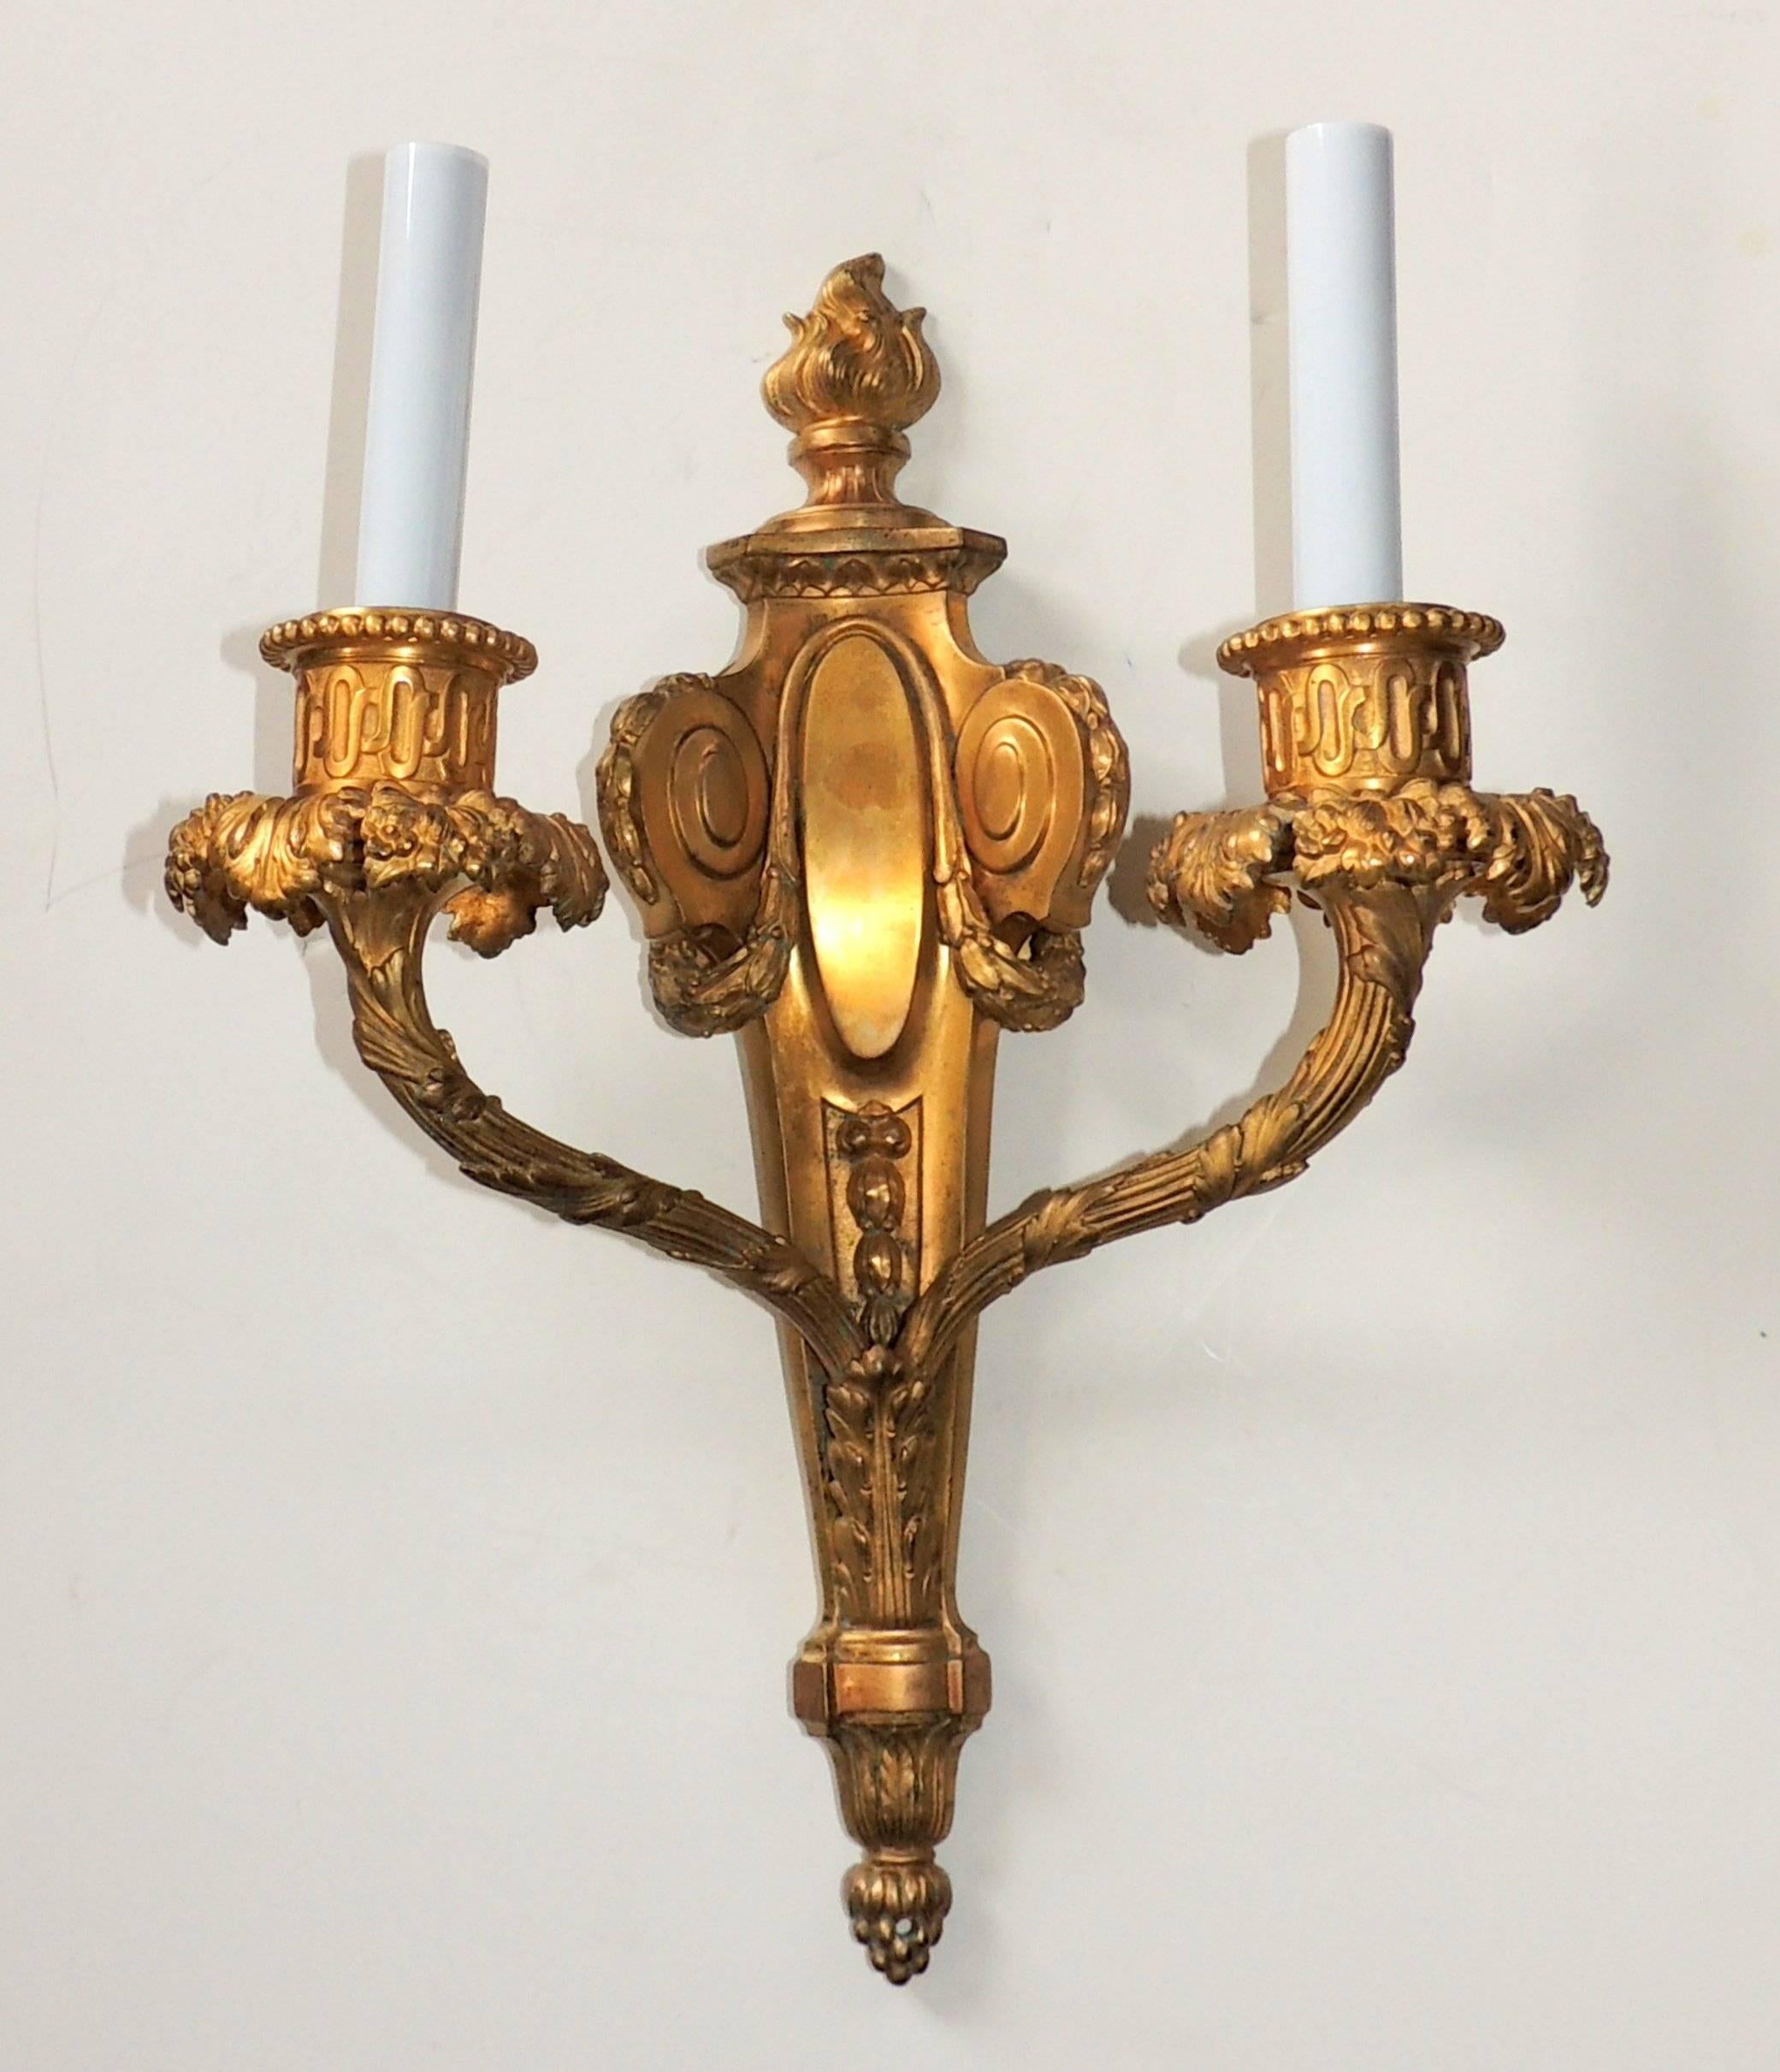 Exceptional pair of French doré bronze fine neoclassical flame top sconces.
Measures: 16